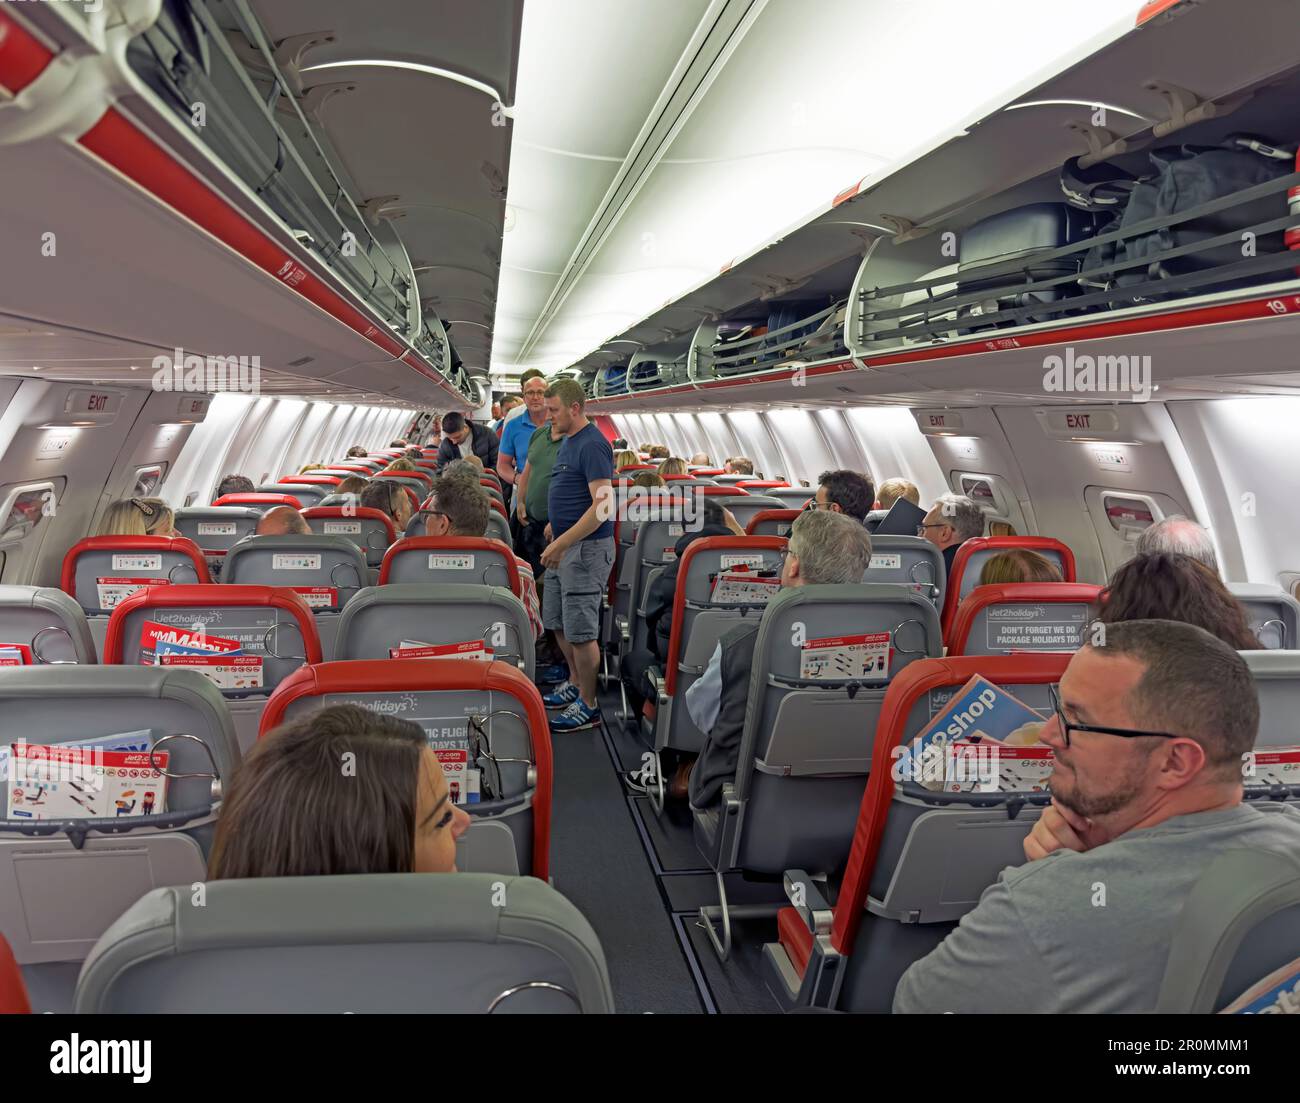 Jet2 airline cabin, prior to take-off, showing walk-on baggage in overhead lockers, Boeing G-JZHN 737-8MG Stock Photo